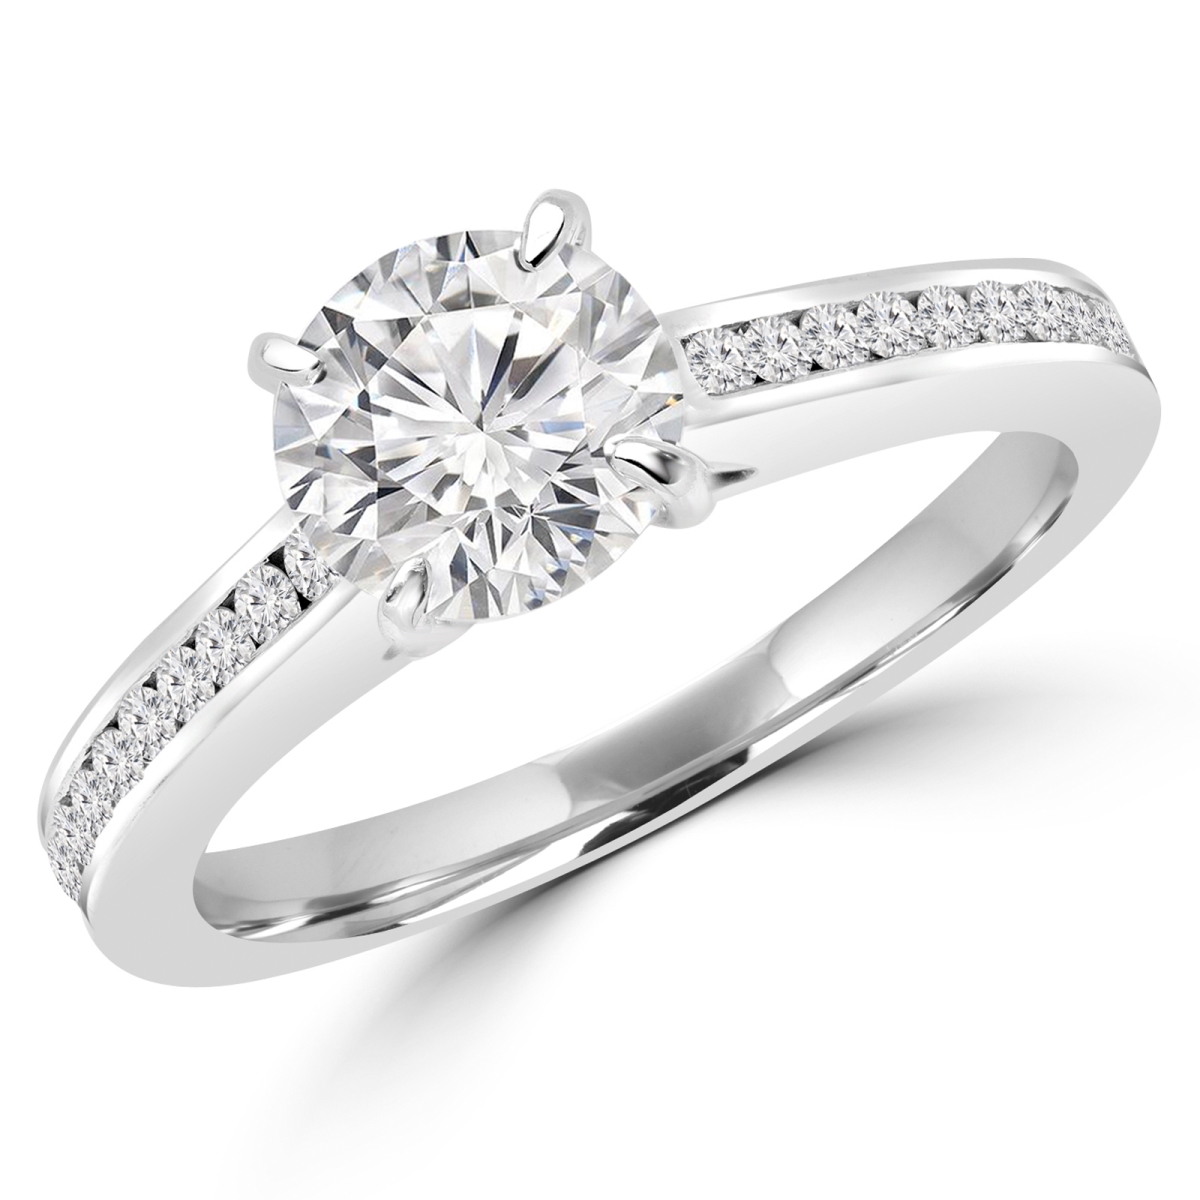 0.6 CTW Round Diamond Solitaire with Accents Engagement Ring in 14K White Gold with Channel Set Accents - Size 5.5 -  Great Gems, GR3058250